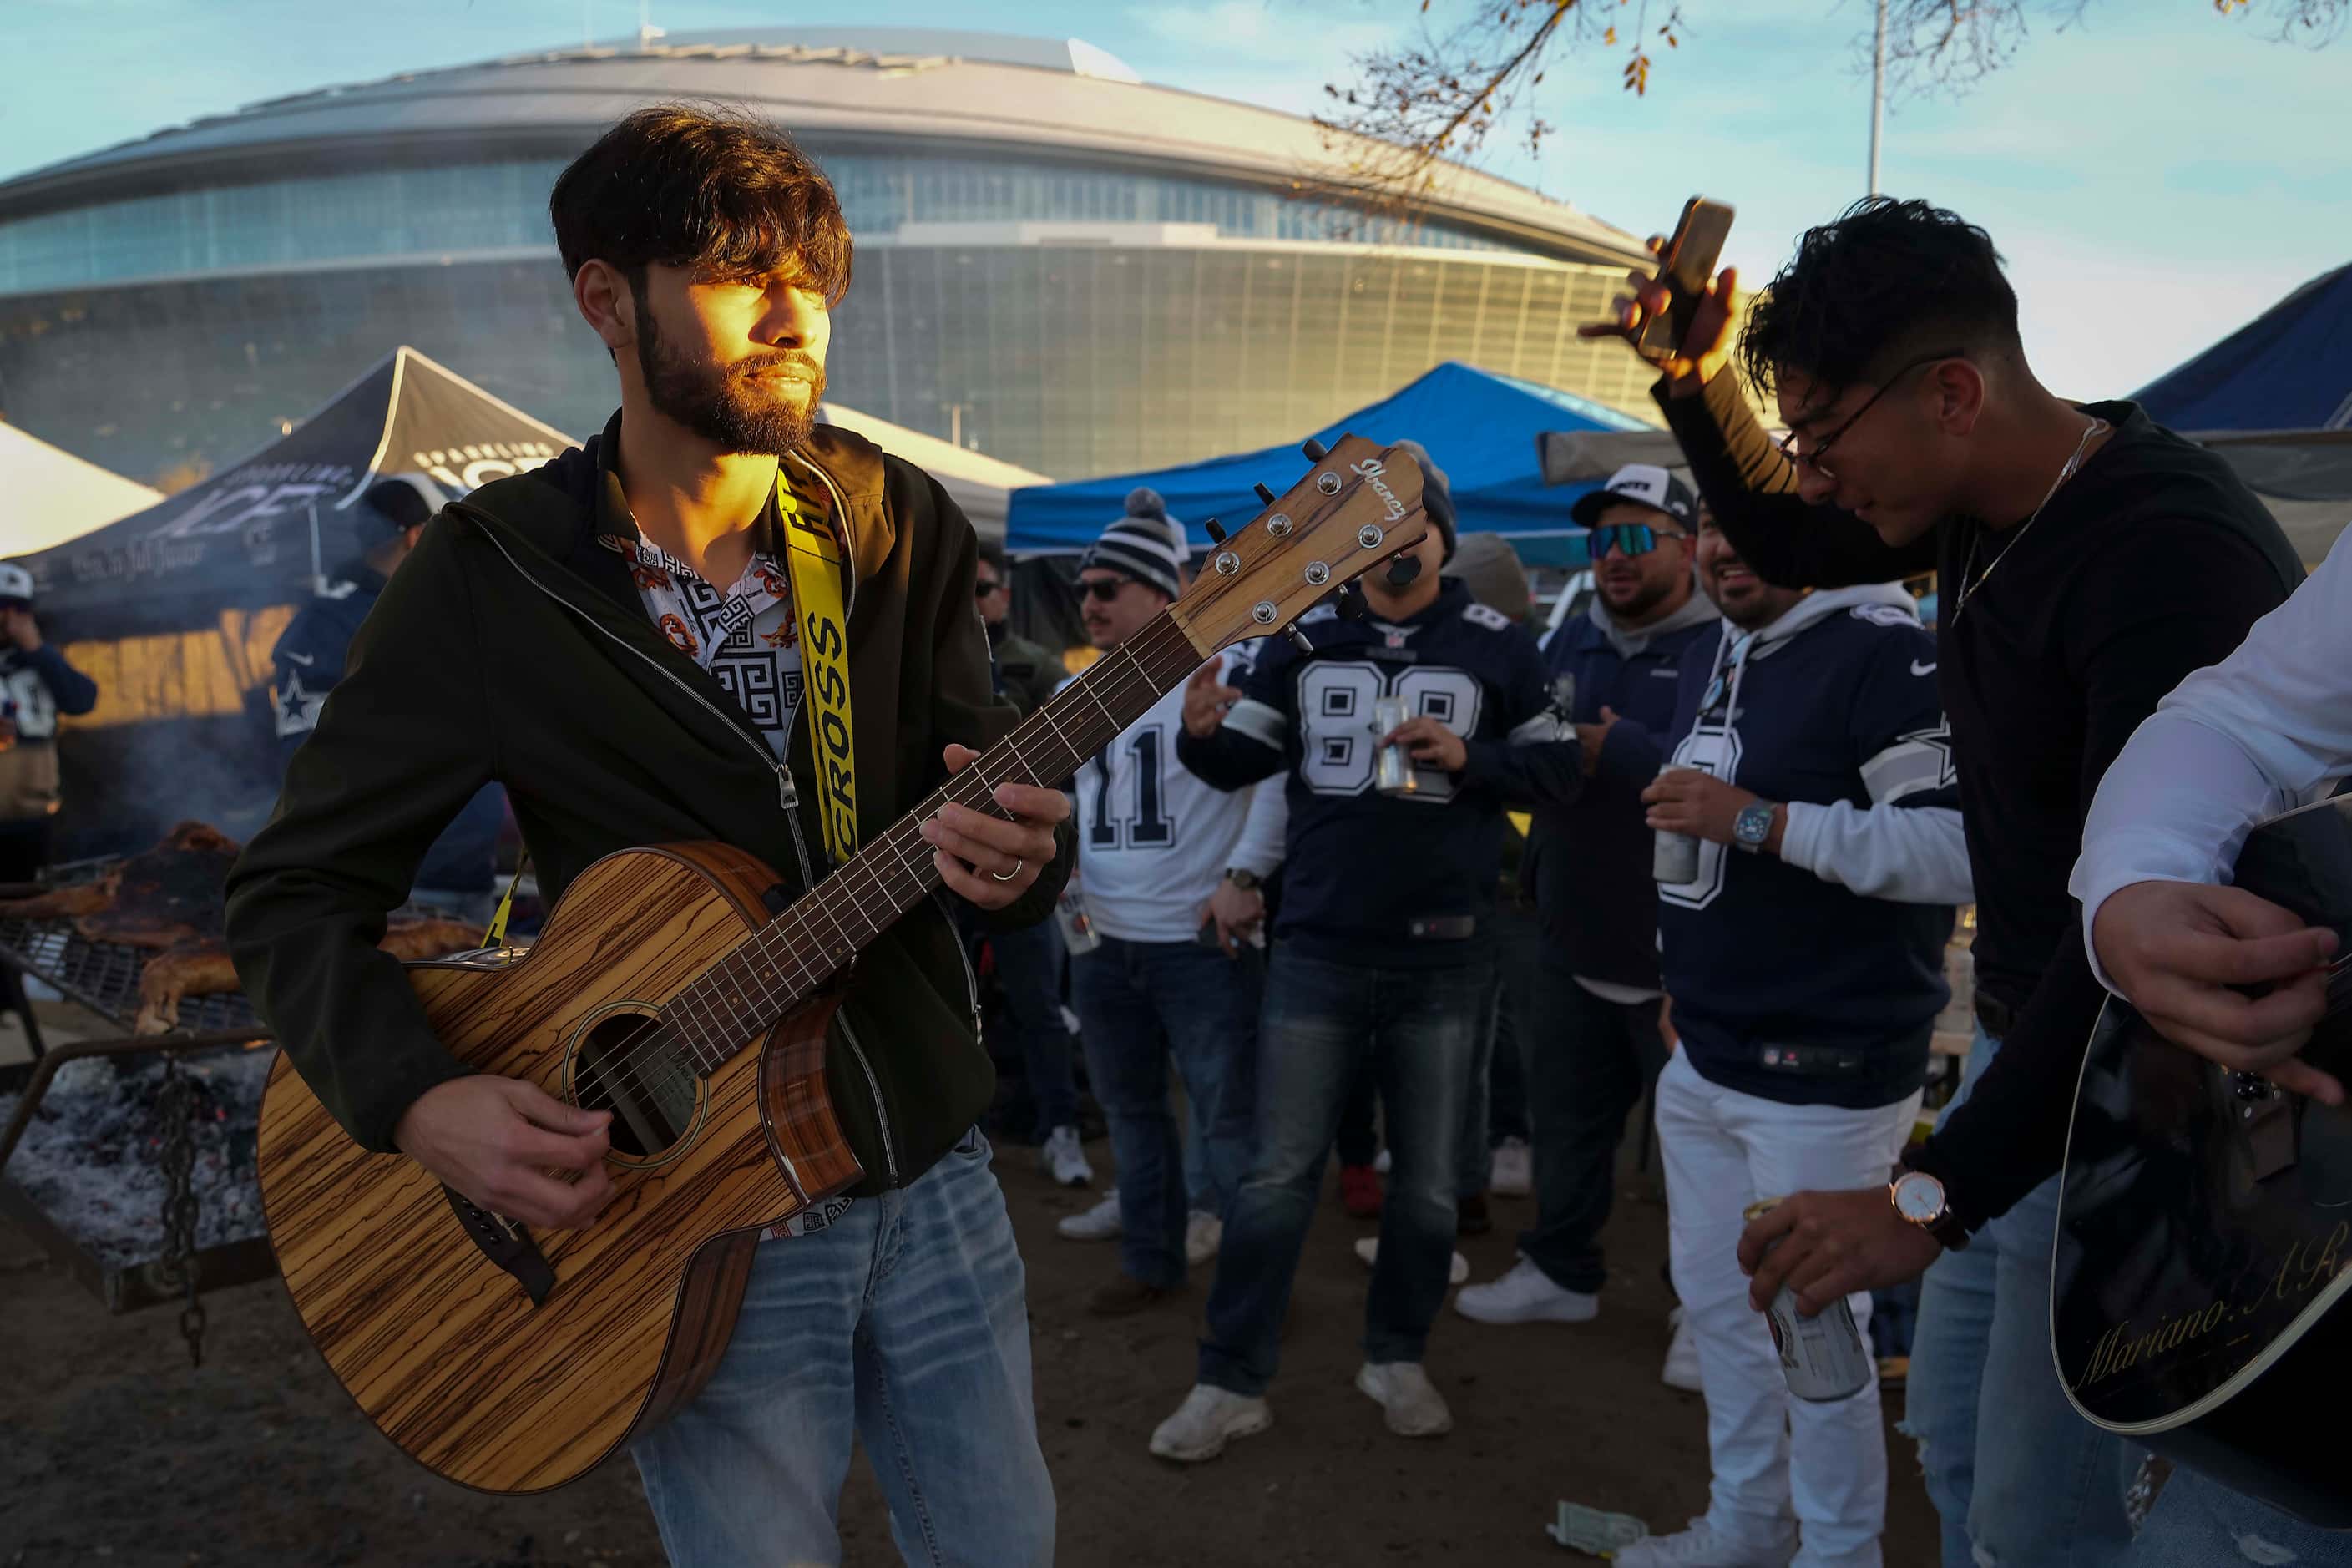 Junior Hernandez of Grupo HZ plays guitar as fans tailgate before an NFL football game...